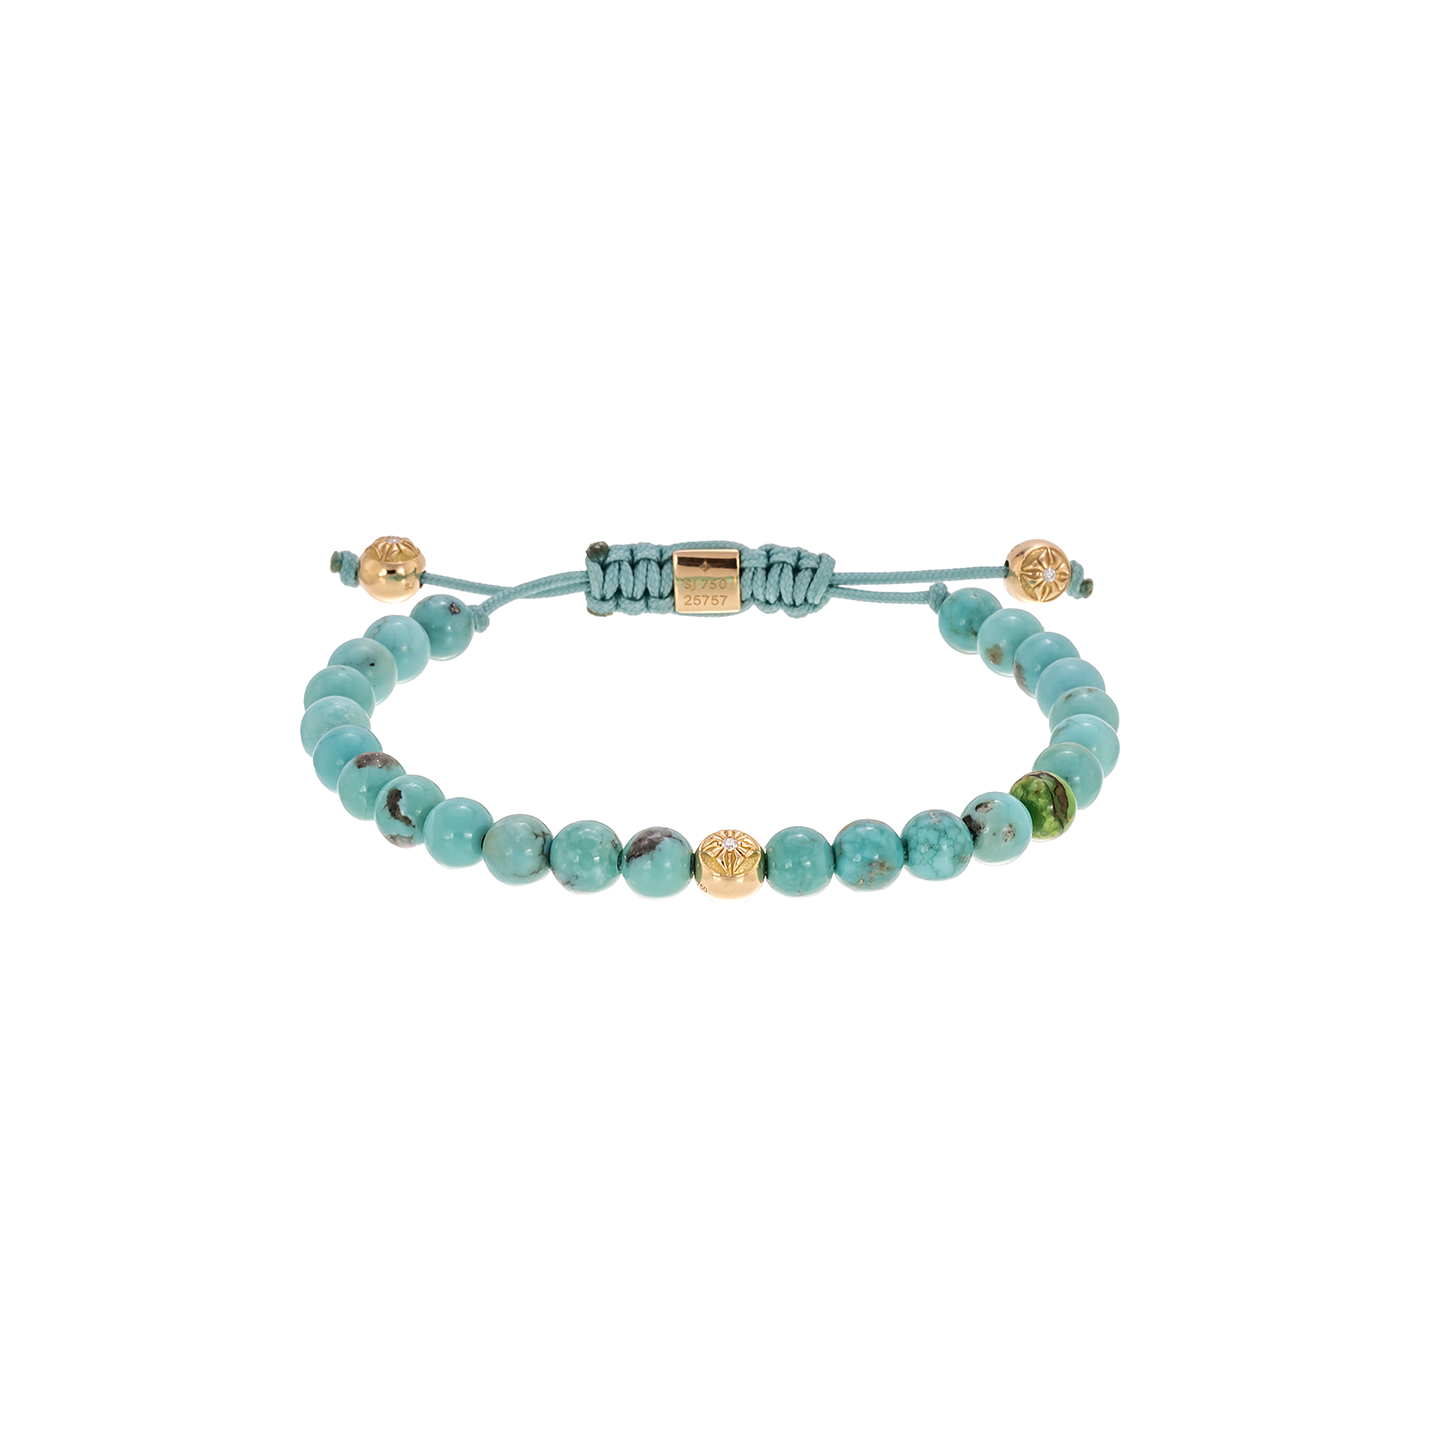 Shamballa Jewels 6mm Non-Braided Beaded Bracelet with Turquoise, Green Turquoise and Yellow Gold on Turquoise Cord